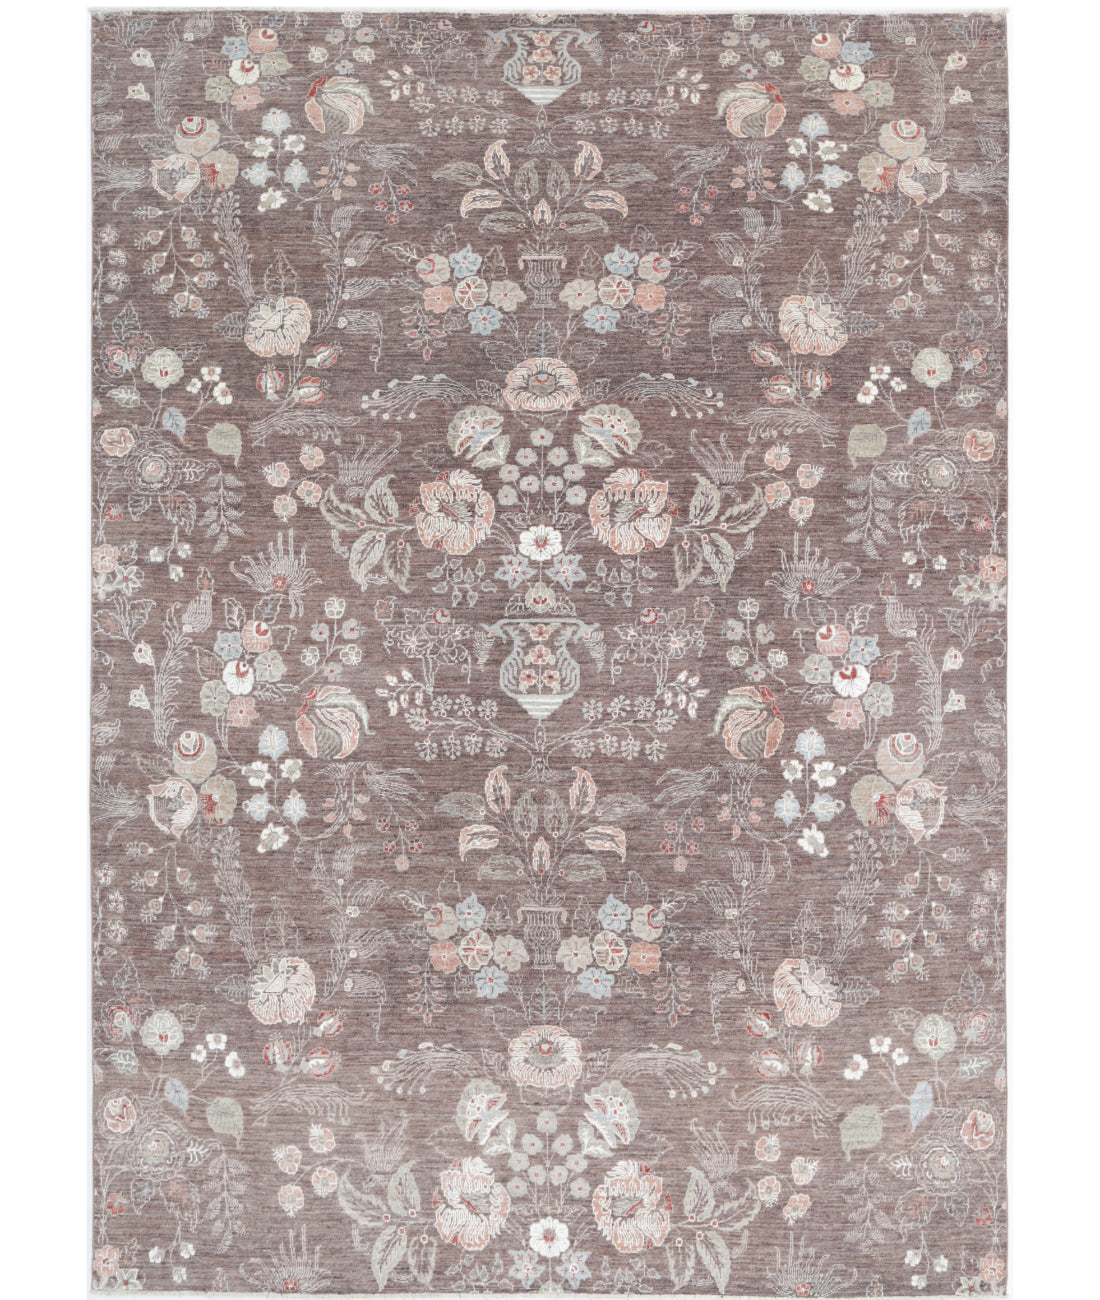 Hand Knotted Artemix Wool Rug - 7'9'' x 10'11'' 7'9'' x 10'11'' (233 X 328) / Brown / Ivory